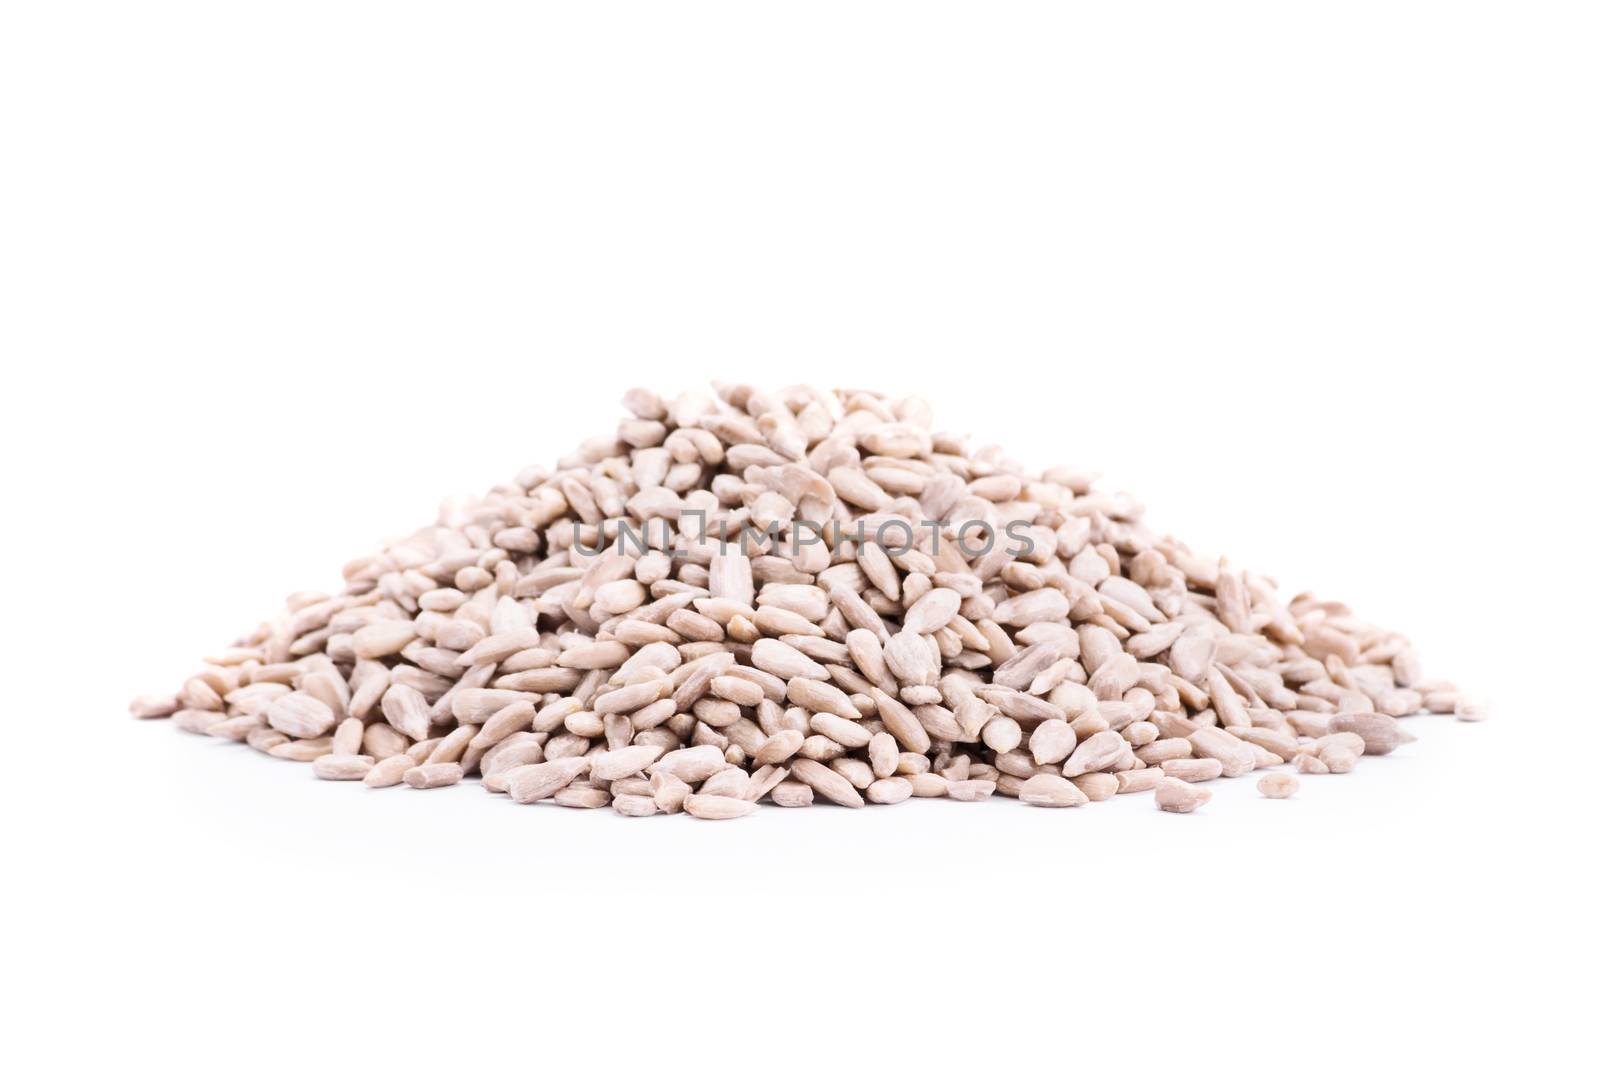 Close up shot of heap of sunflower seeds, isolated on white background.